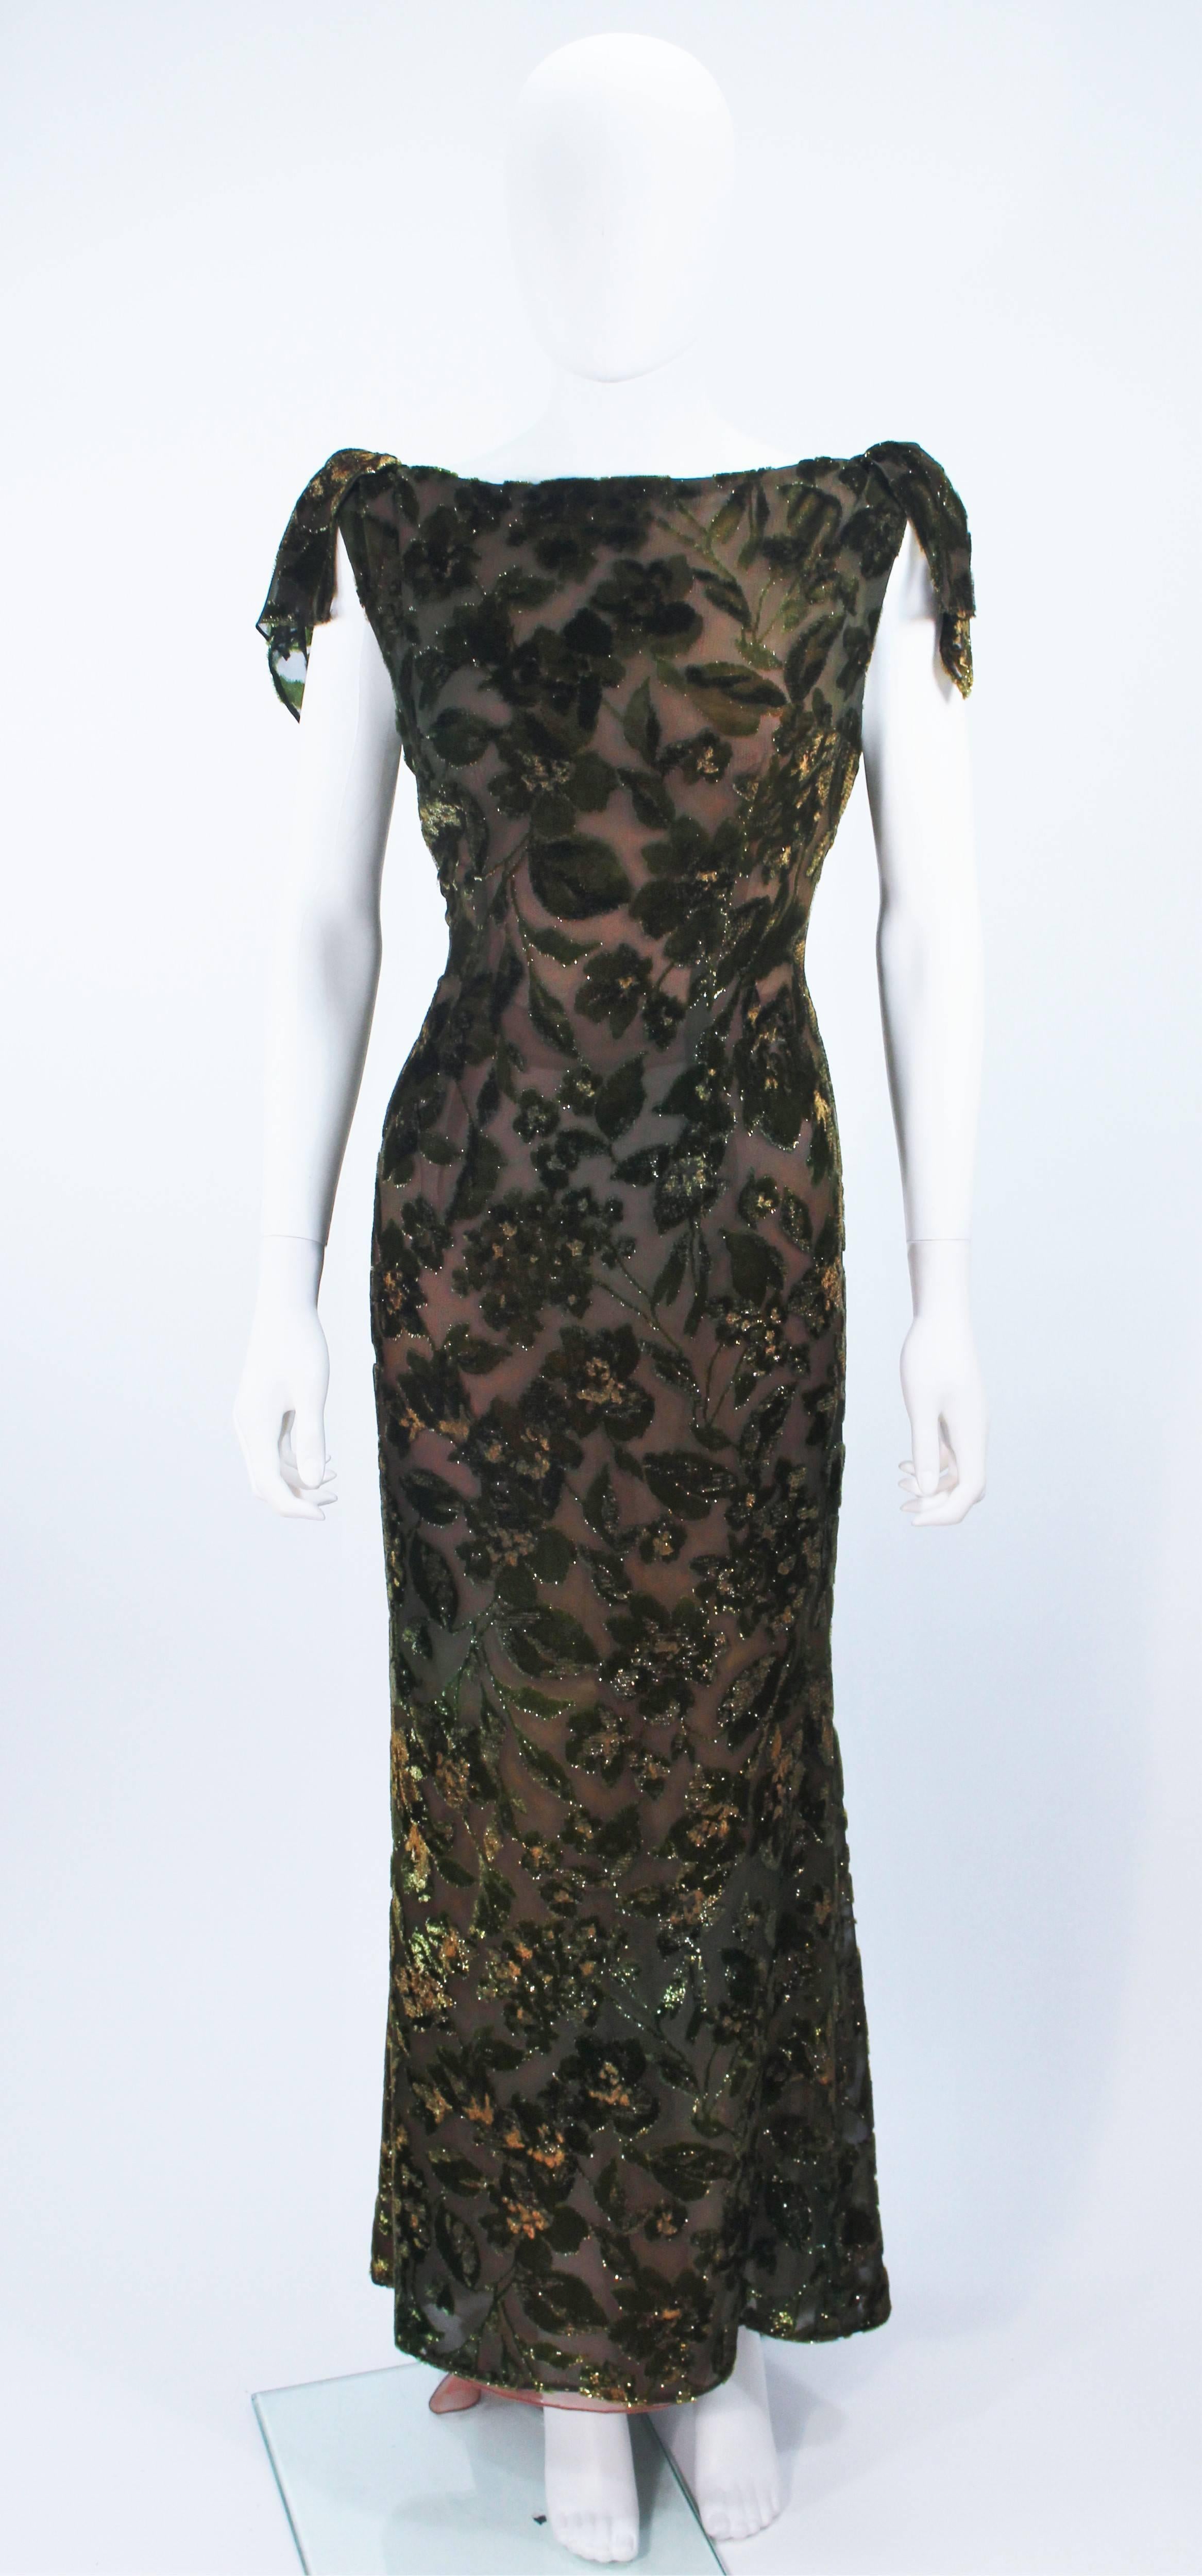  This gown is composed of a green multi hue metallic silk velvet. Features a draped design with shoulder bow detail and center back zipper. This design is semi-sheer with a nude lining. In great vintage condition. 

  **Please cross-reference